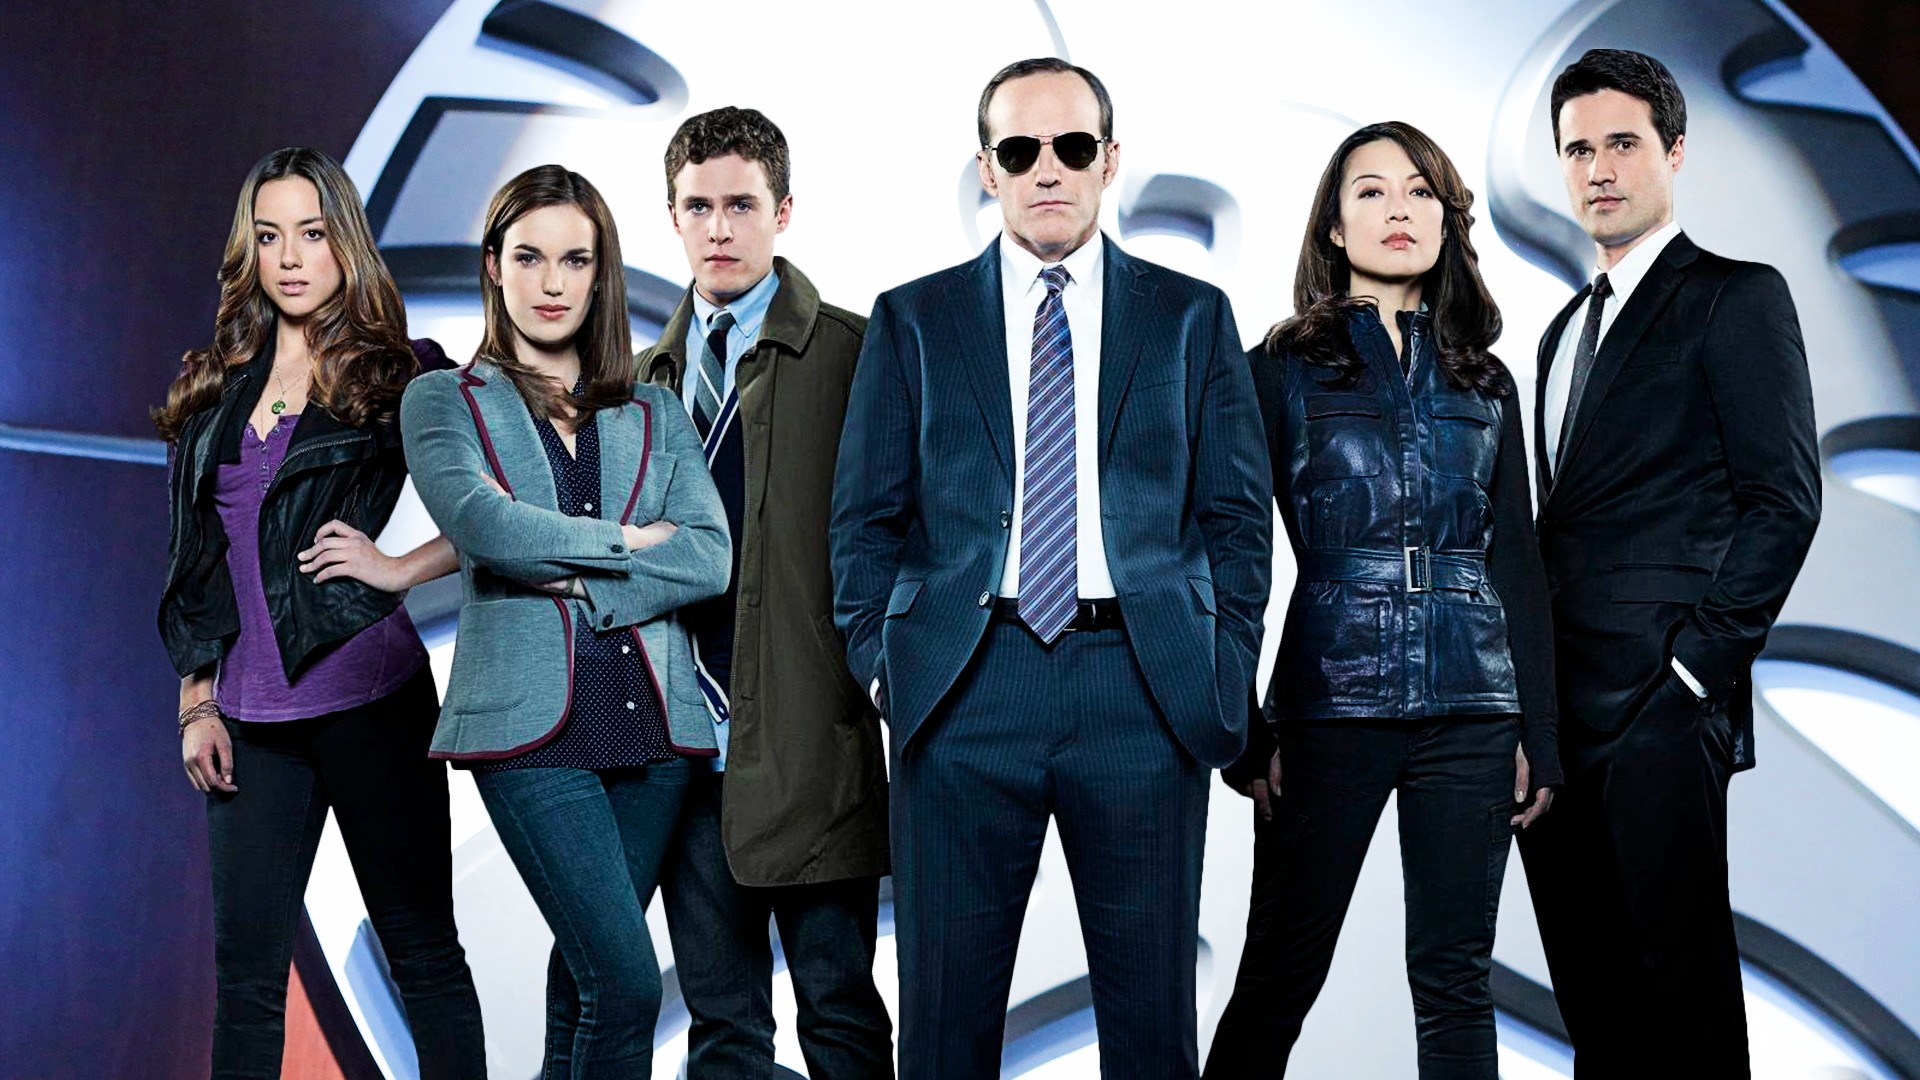 Exclusive: Agents of SHIELD Returning To The Marvel Cinematic Universe